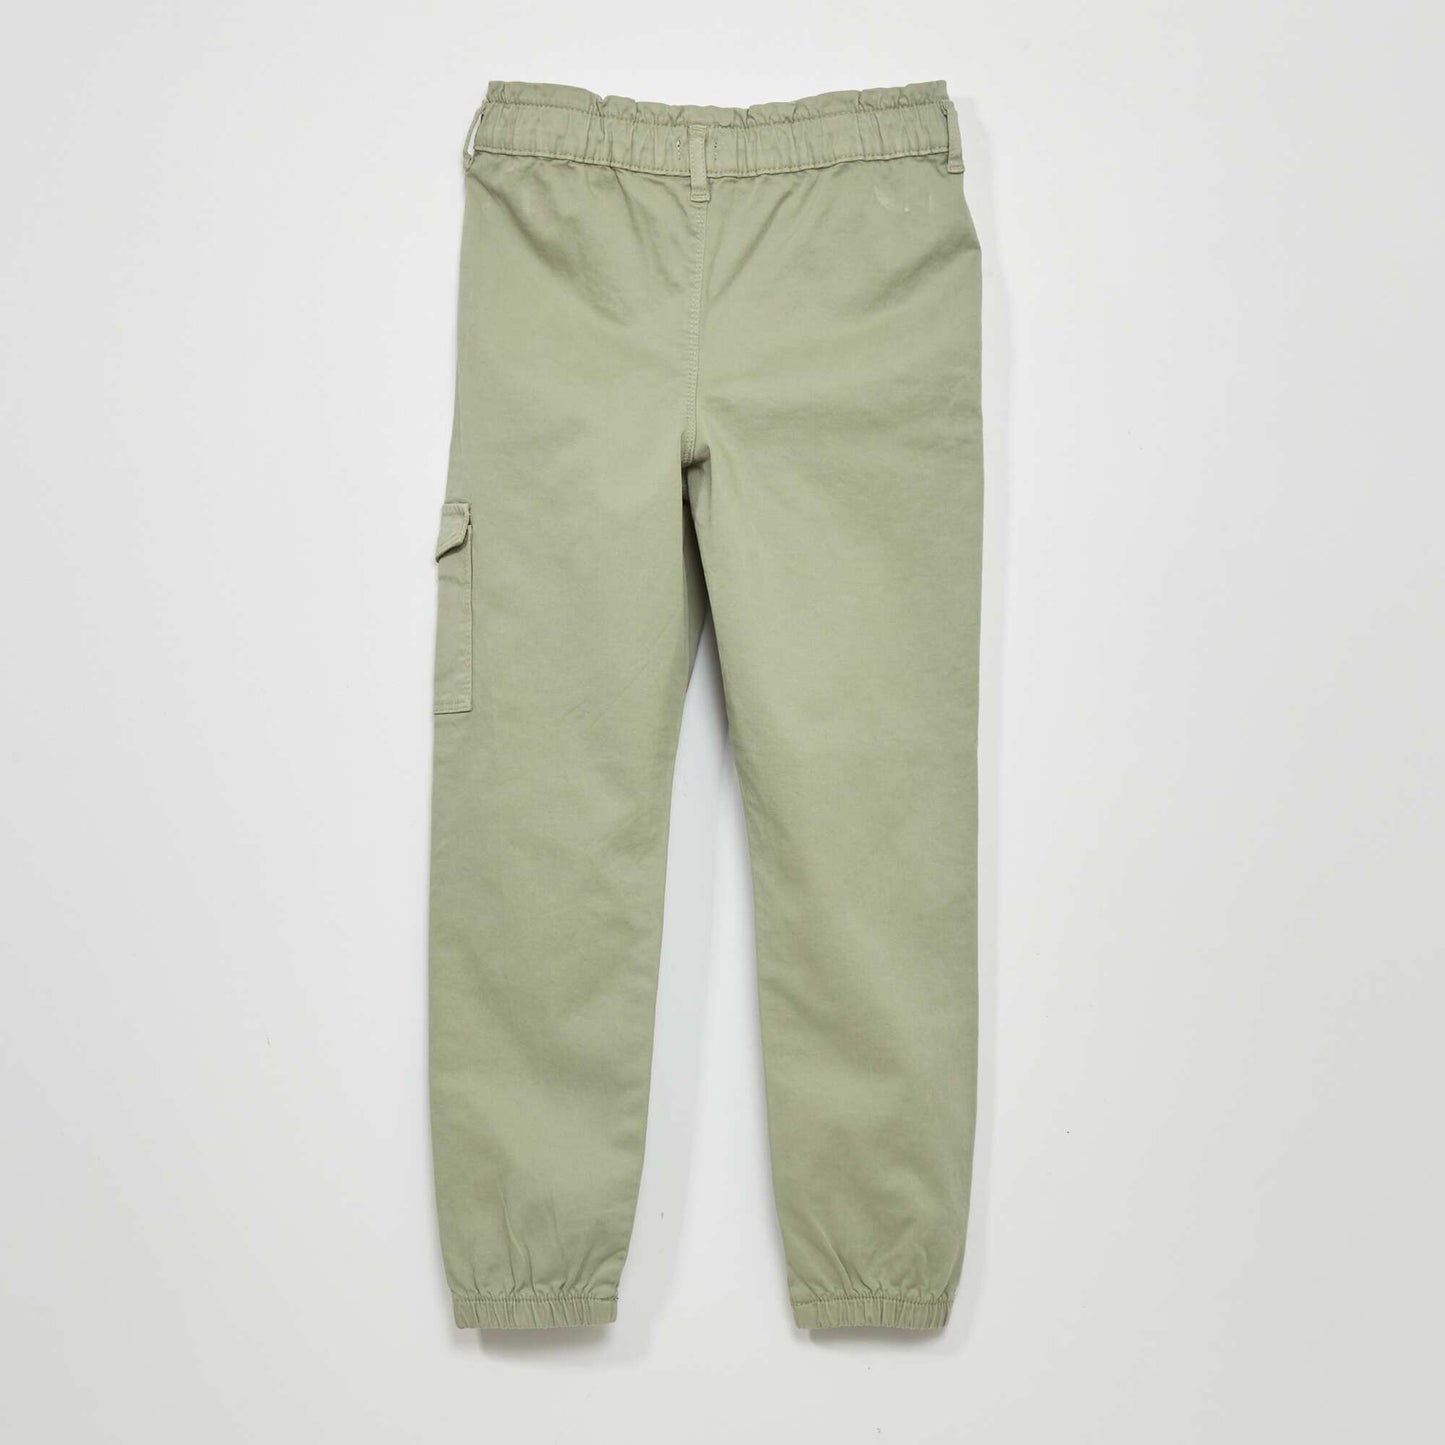 Paper bag trousers with pockets grey green